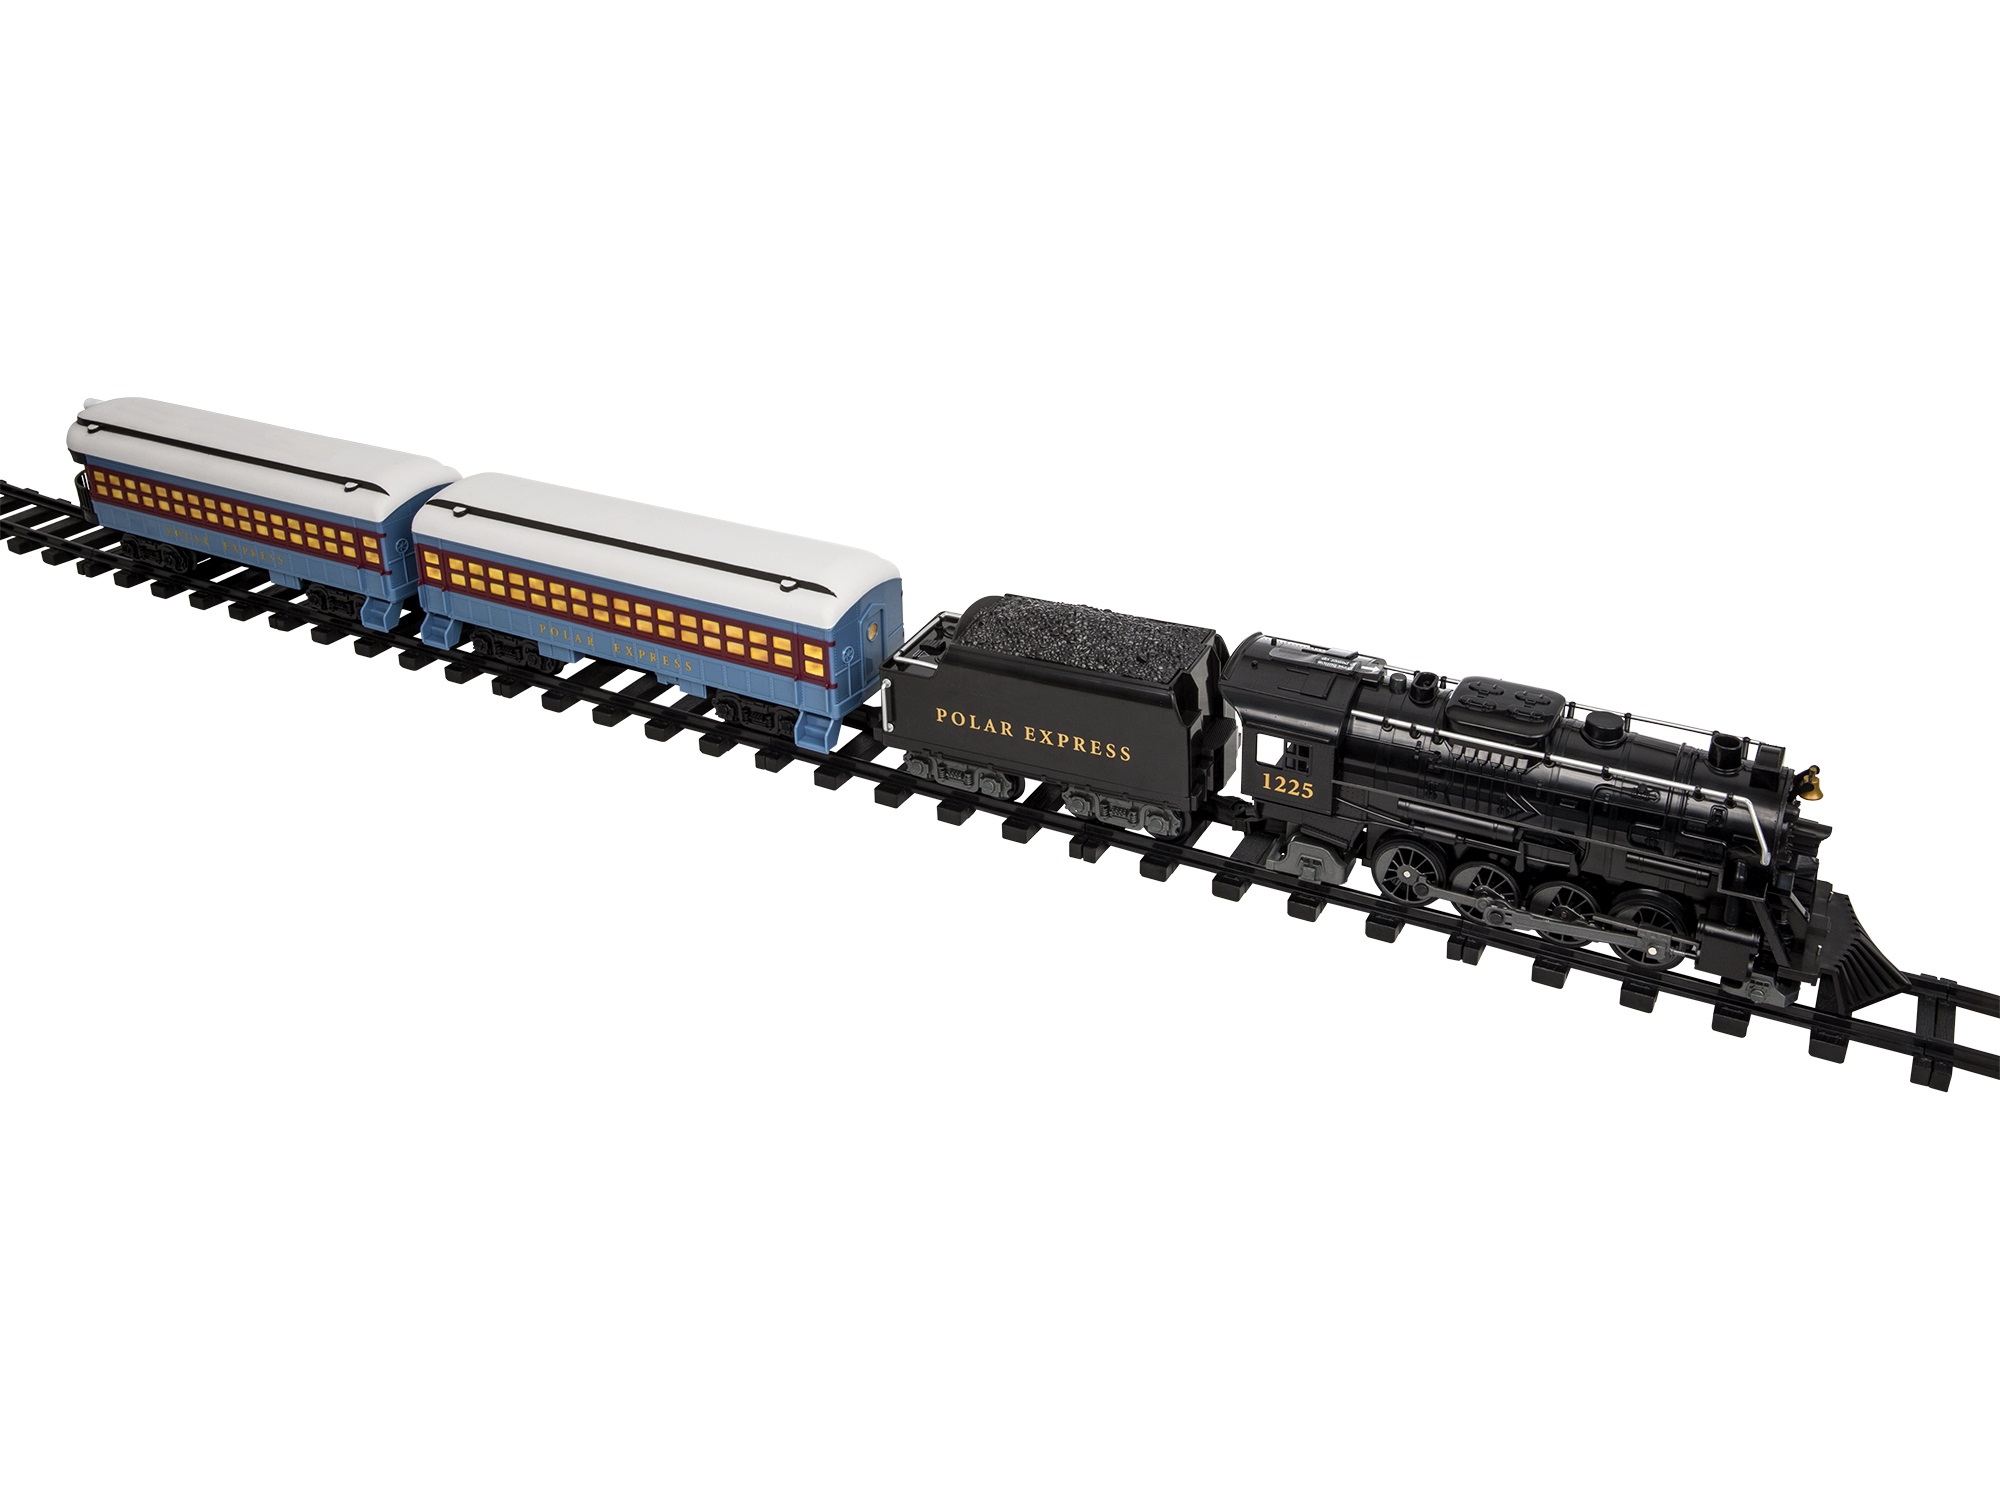 Lionel Polar Express Train Set Battery Operated 7-11824 2018 for sale online 